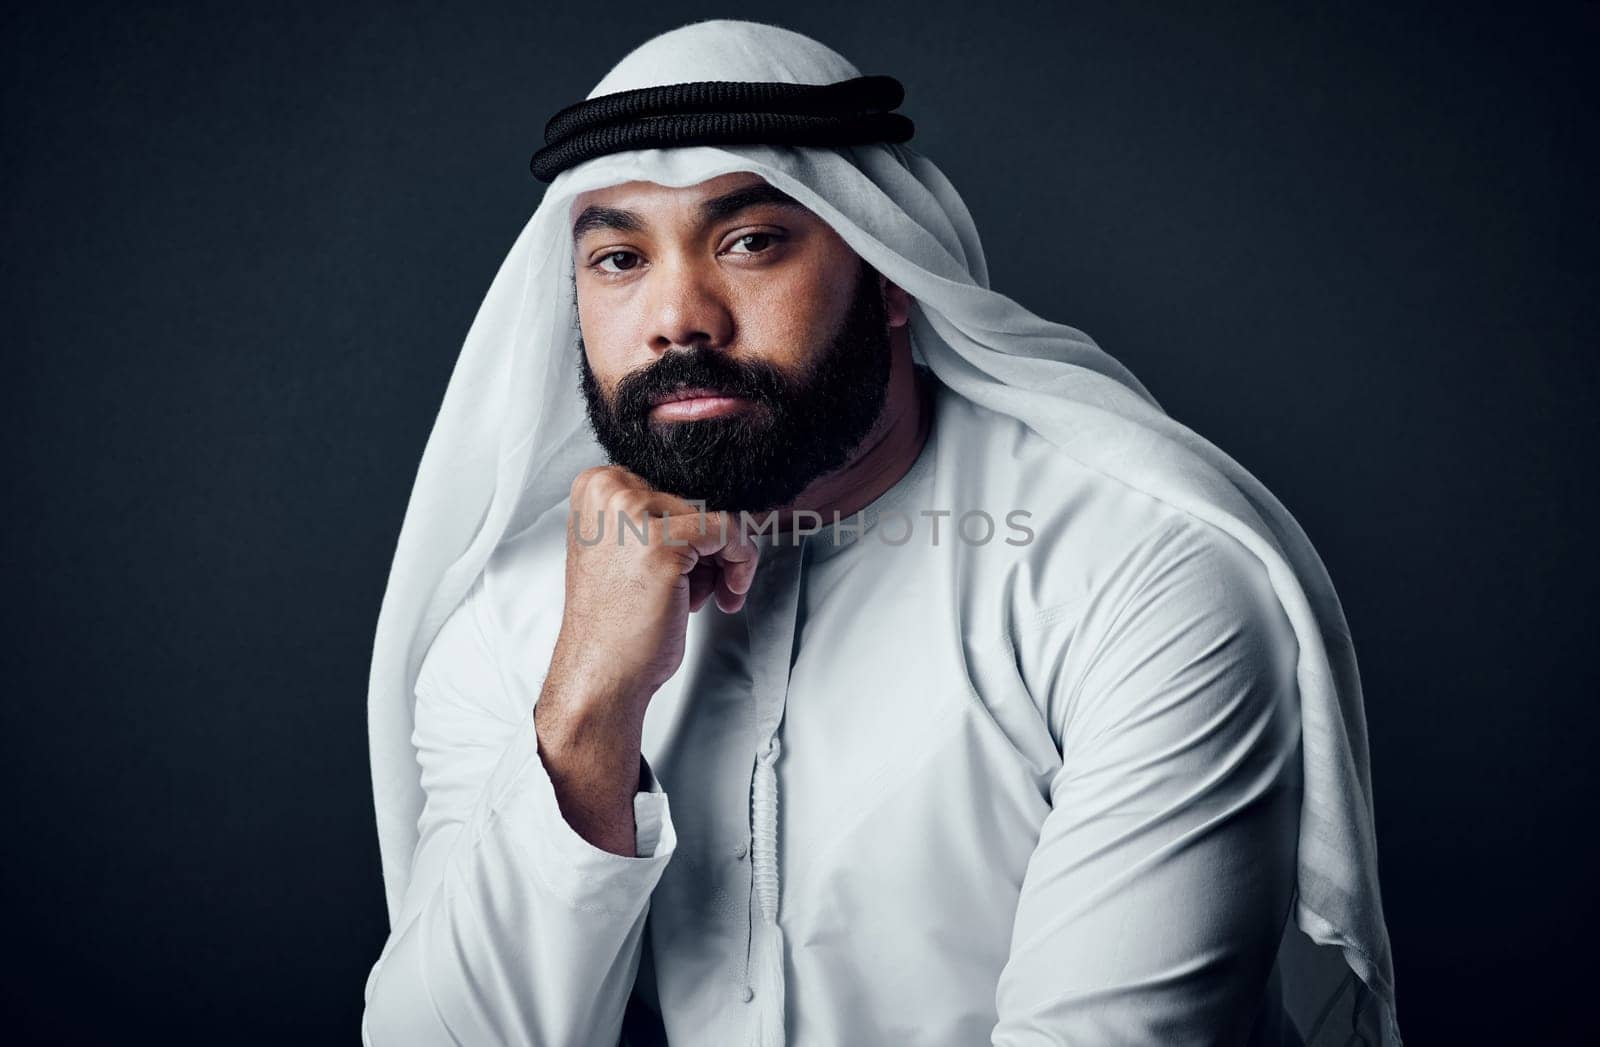 Attitude of a champion. Studio shot of a young man dressed in Islamic traditional clothing posing against a dark background